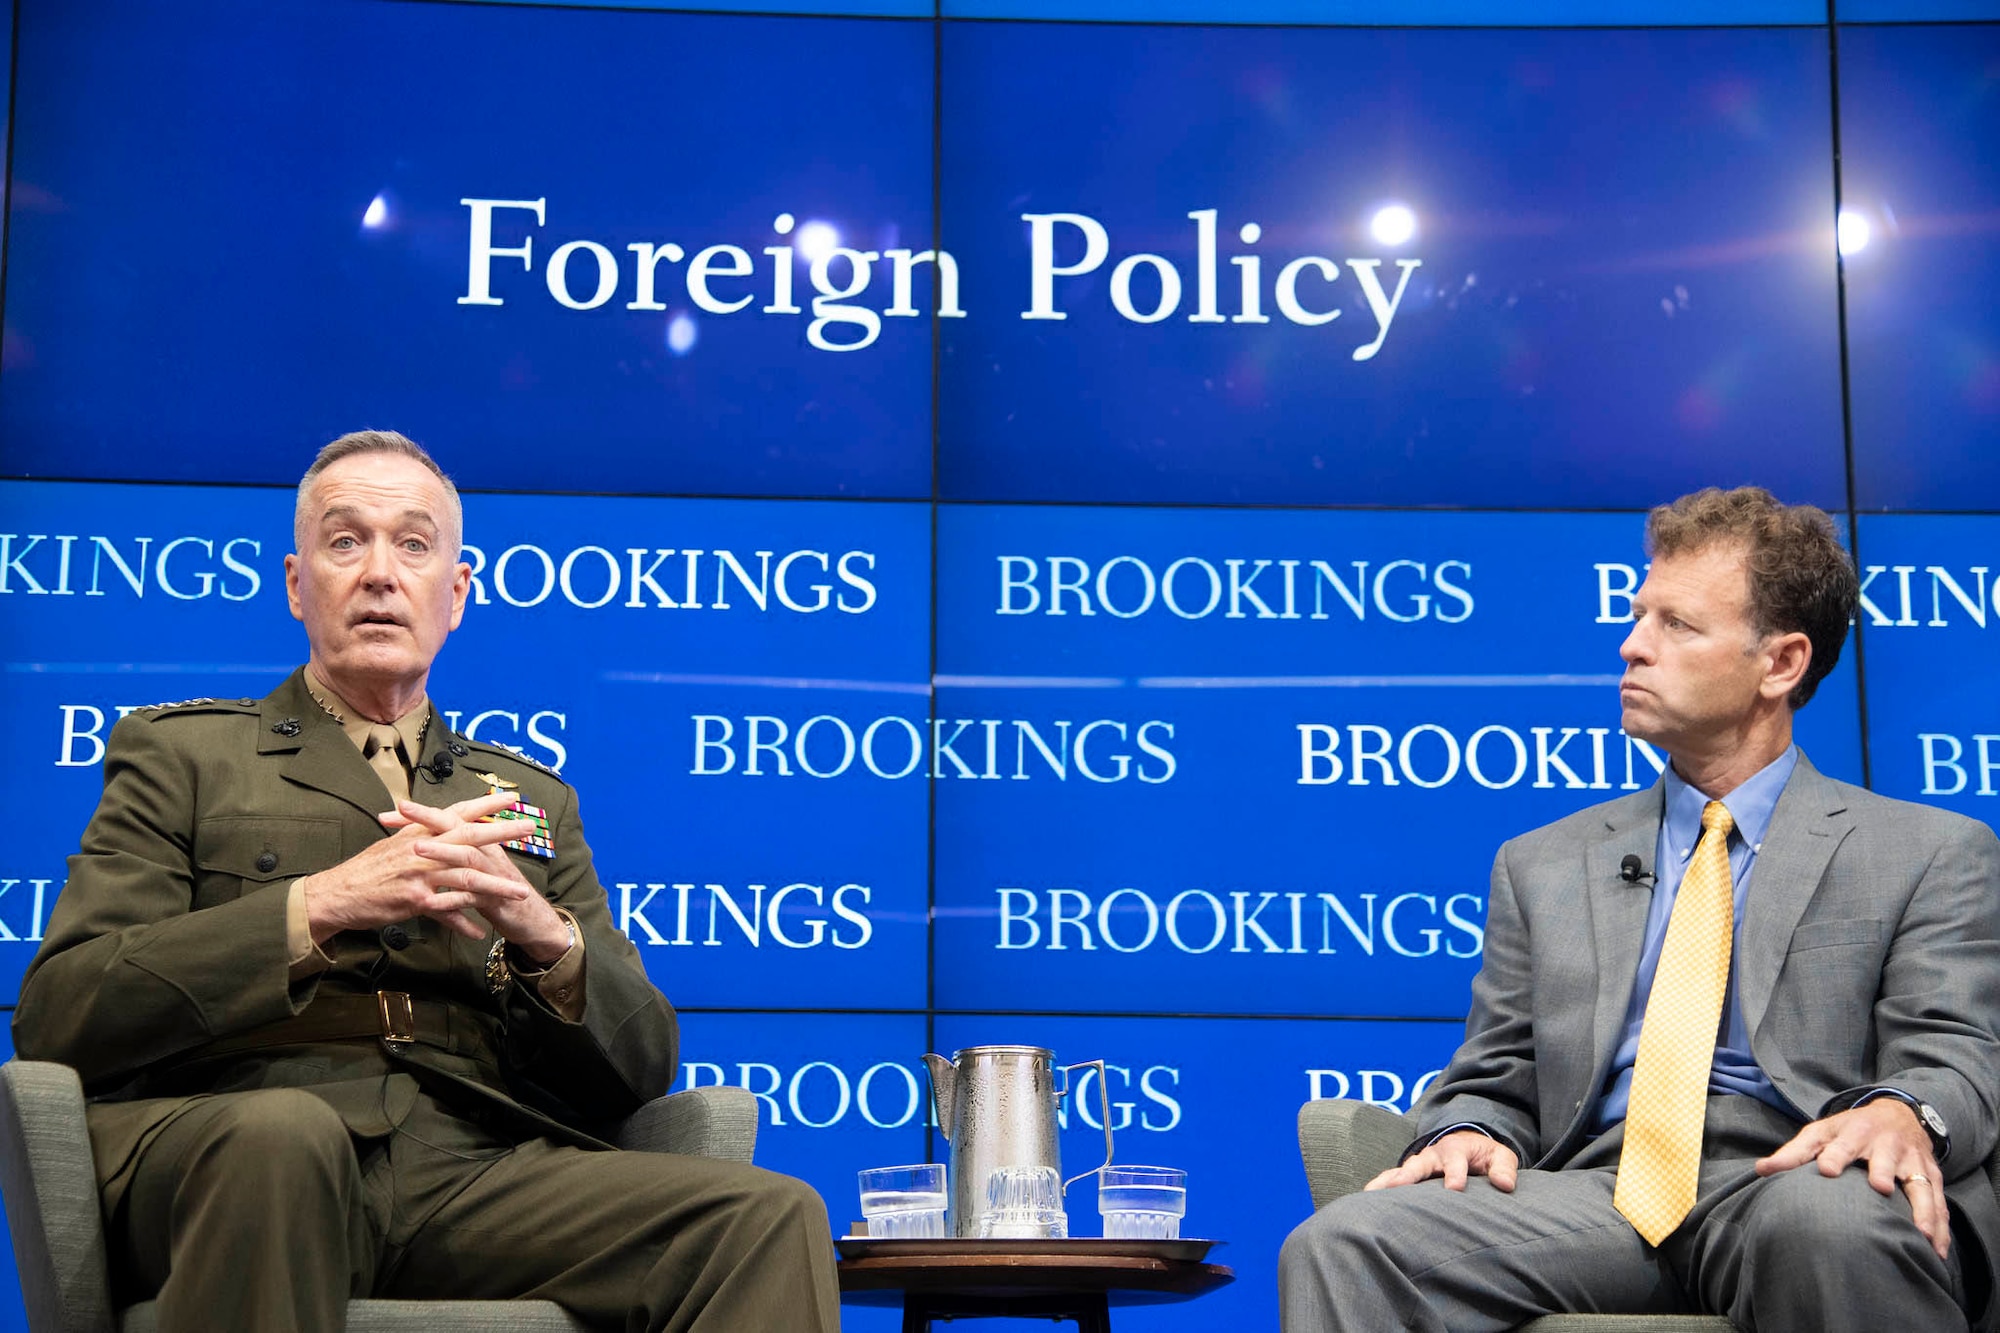 Marine Corps Gen. Joe Dunford, chairman of the Joint Chiefs of Staff, participates in a moderated discussion with Michael O'Hanlon, senior fellow at the Brookings Institution, in the Falk Auditorium at the Brookings Institution in Washington, D.C., May 29, 2019. Brookings hosted General Dunford for a discussion on the national security landscape facing America, the state of the nation’s armed forces, and key defense choices for the future.